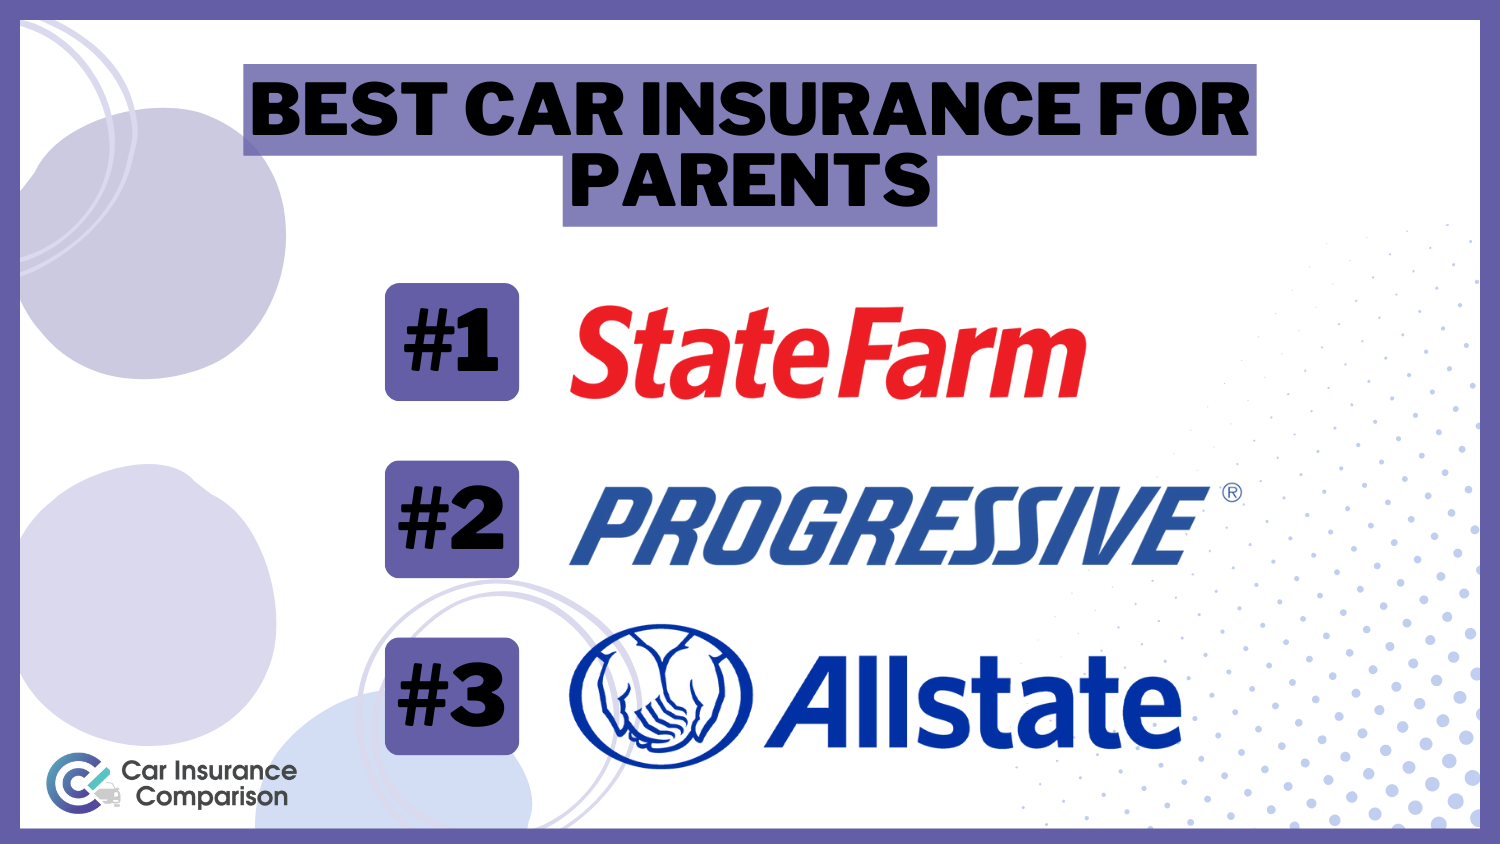 Best Car Insurance for Parents: State Farm, Progressive, and Allstate